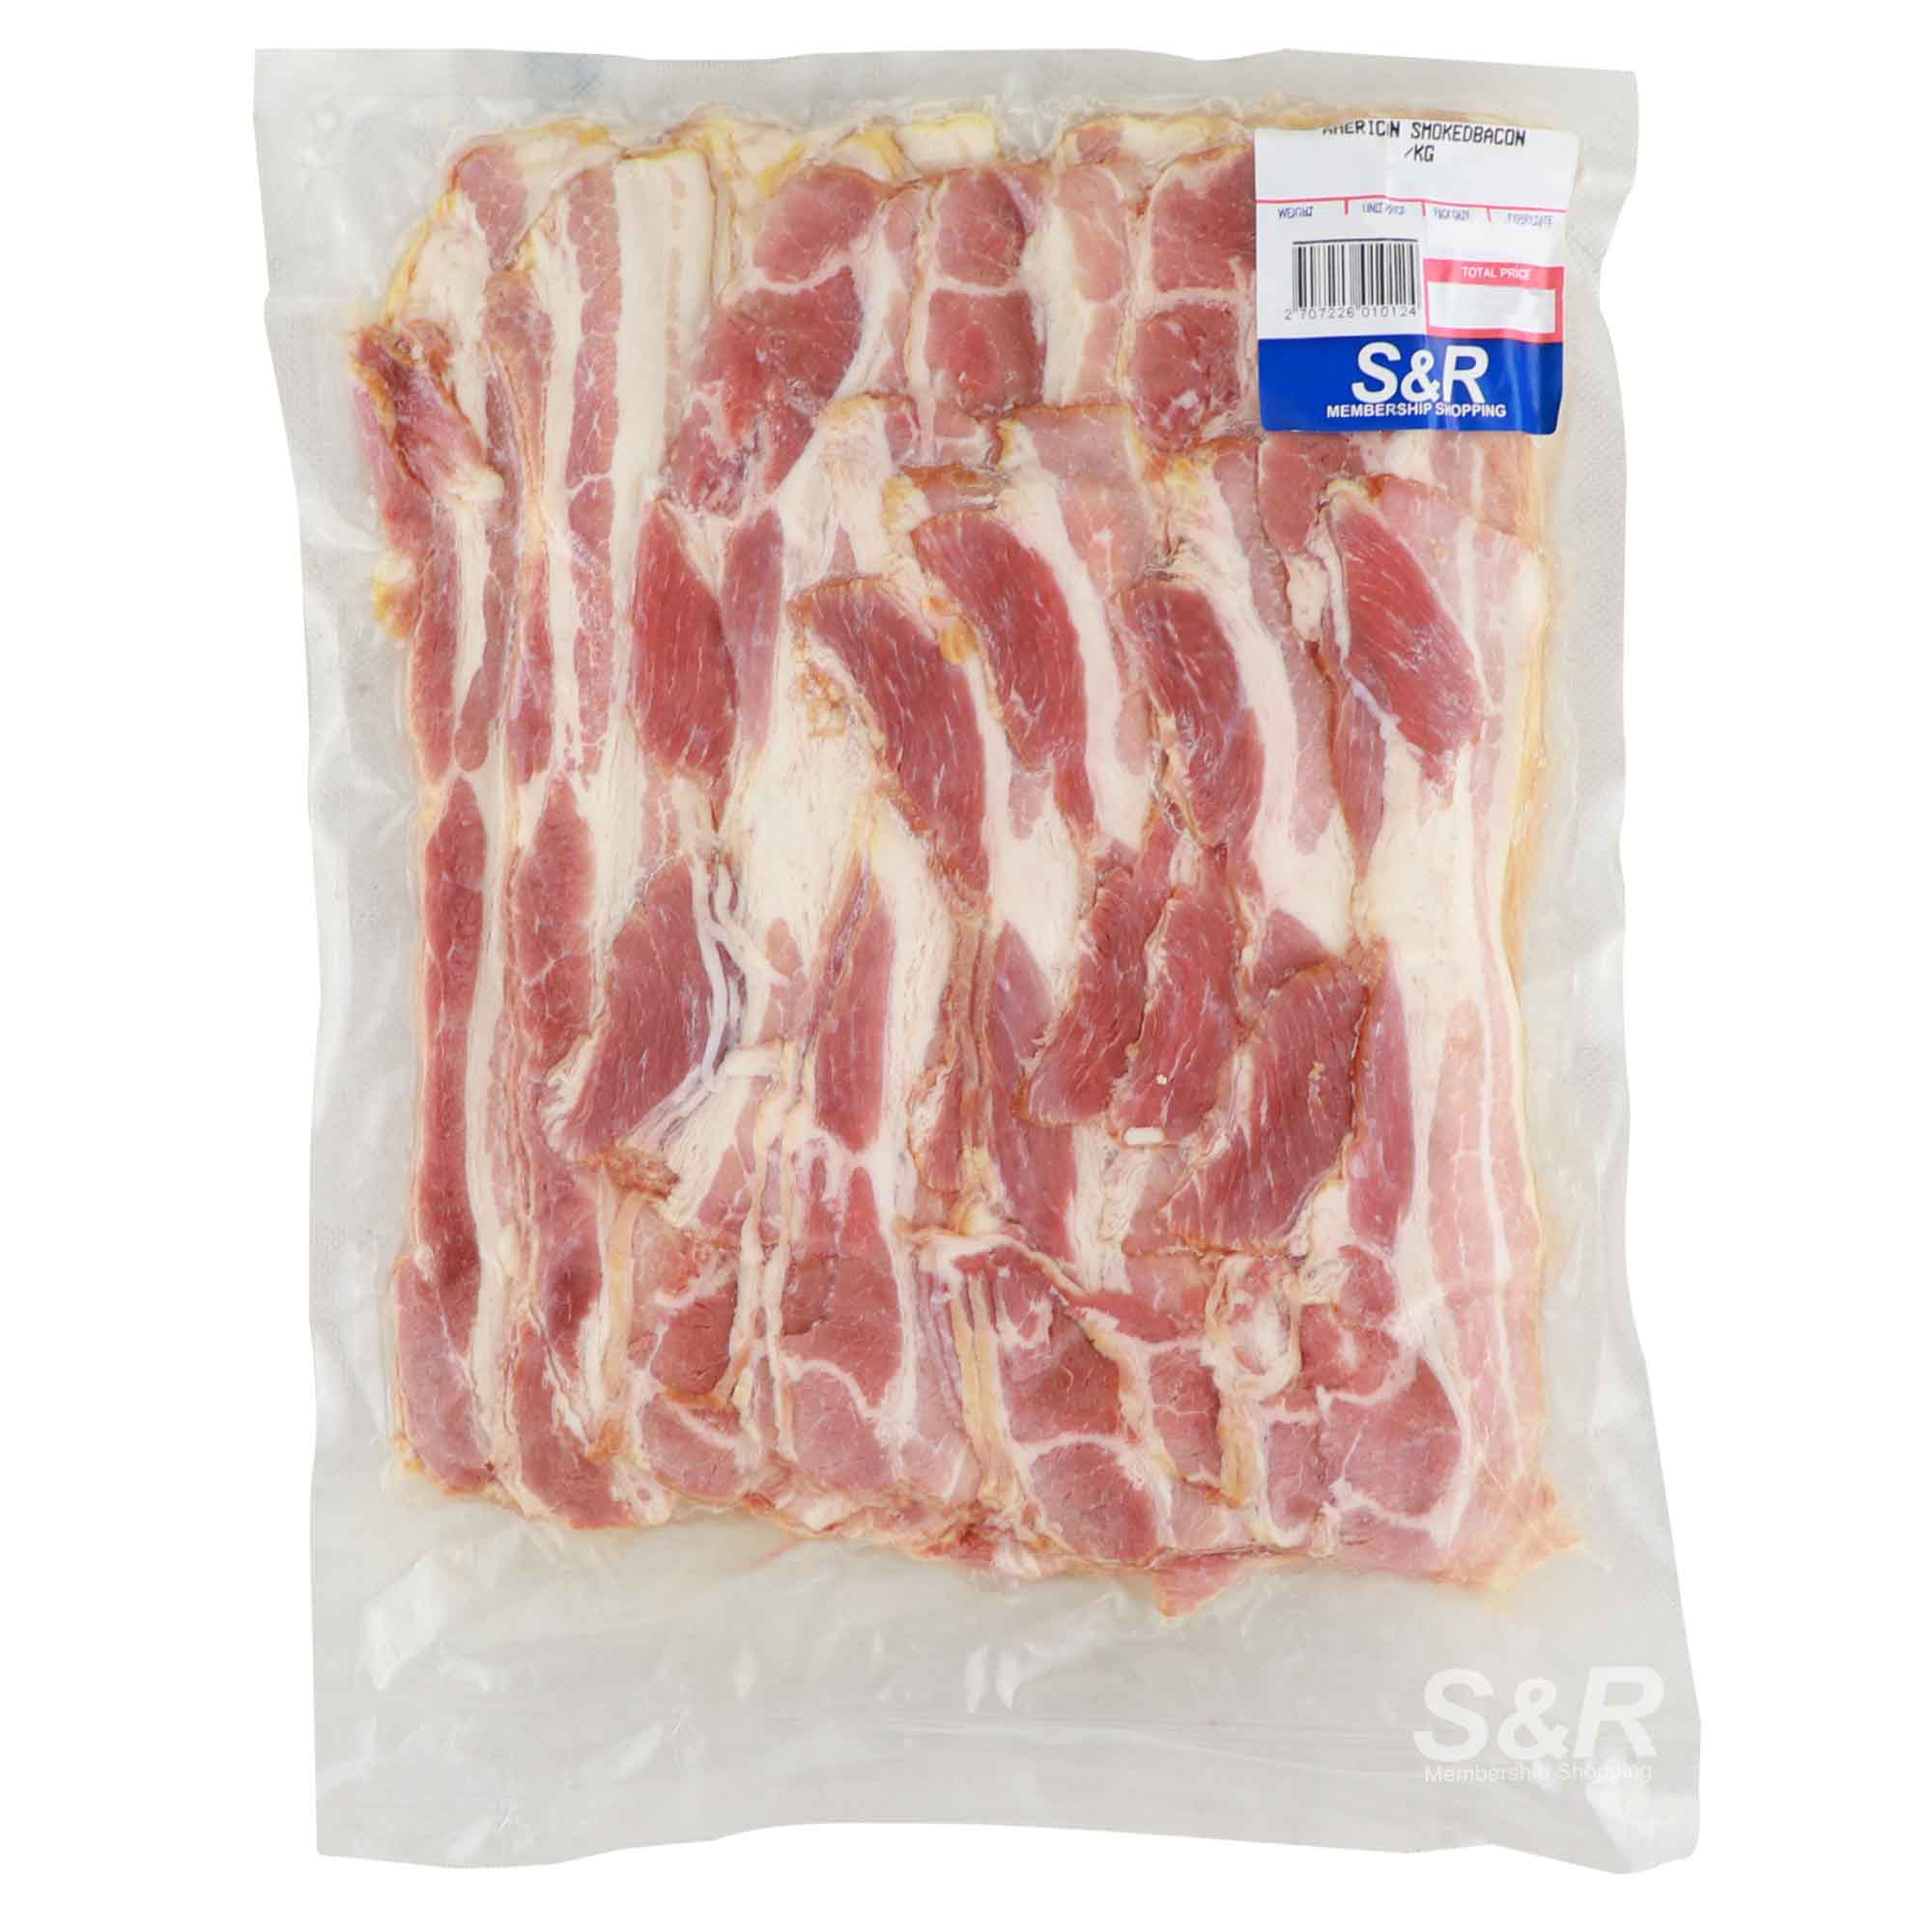 S&R American Smoked Bacon approx. 1.2kg